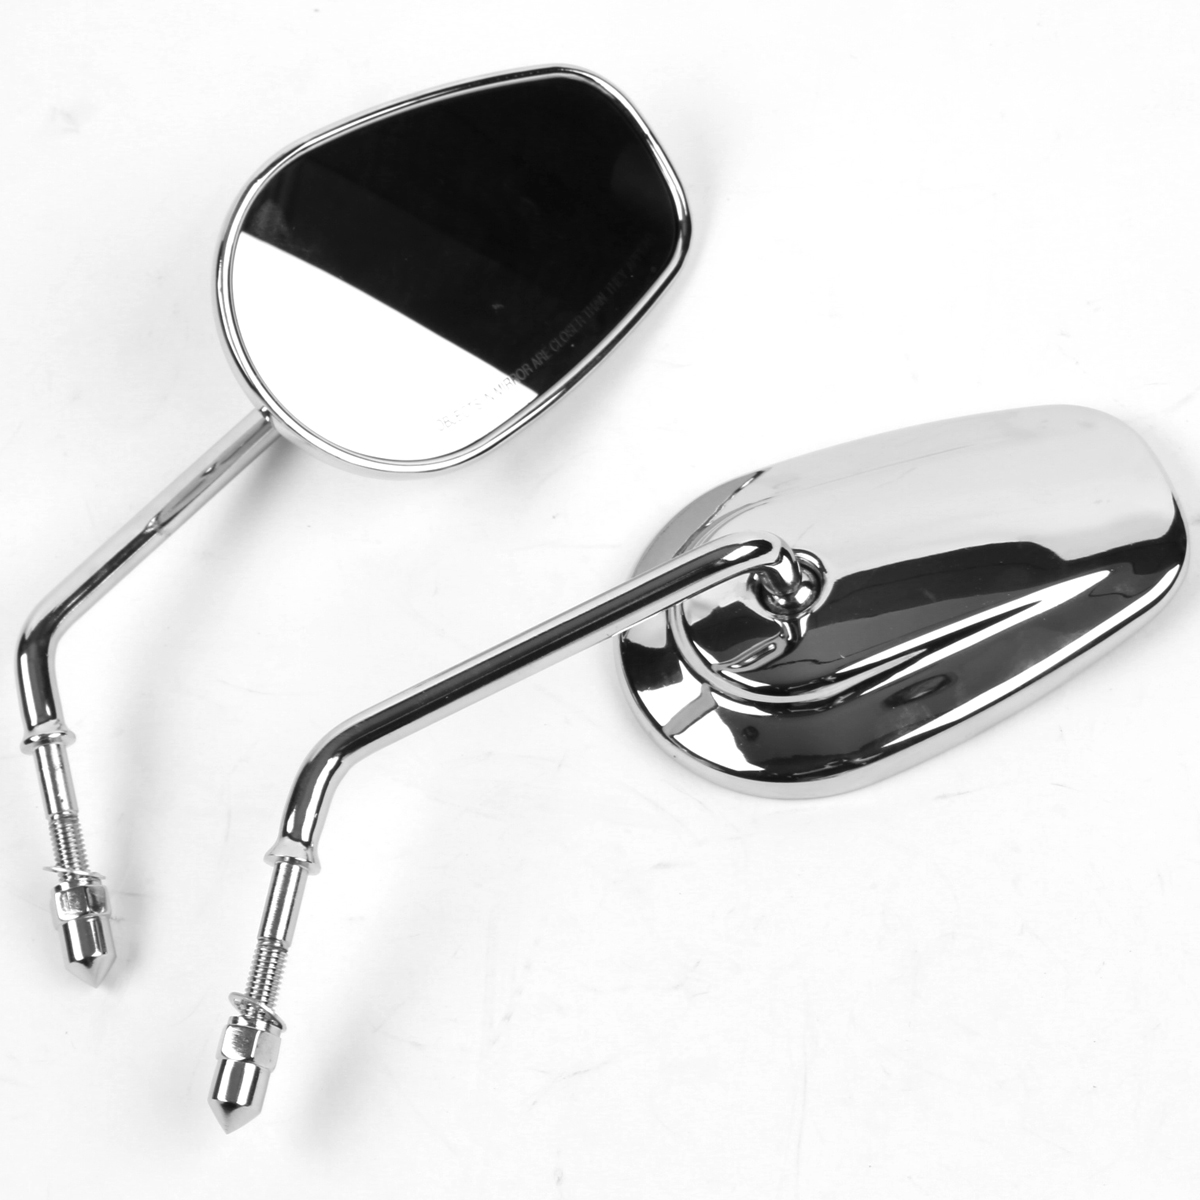 Chrome Rearview Side Mirror For Harley Touring Road Glide Sportster Softail Dyna